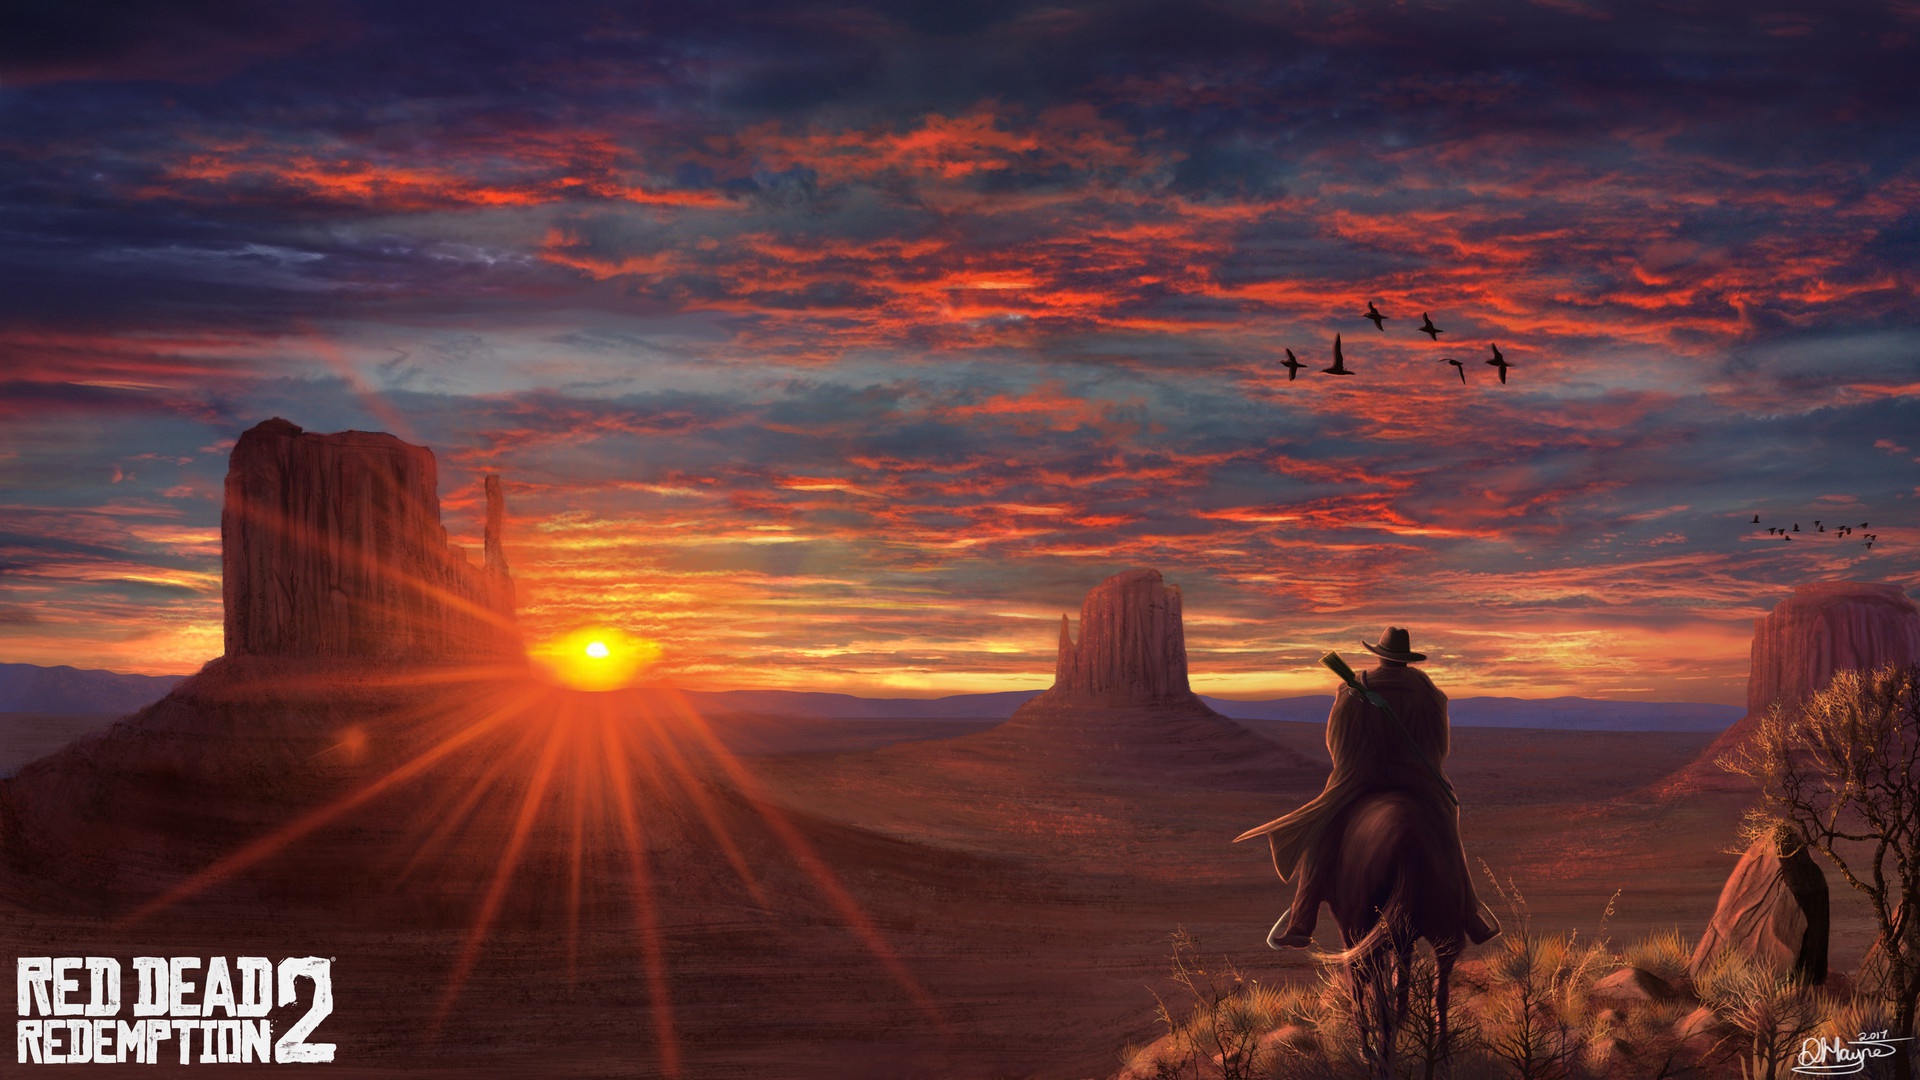 Video Games Red Dead Redemption 2 Sunlight Sky Video Game Art 2017 Year 1920x1080